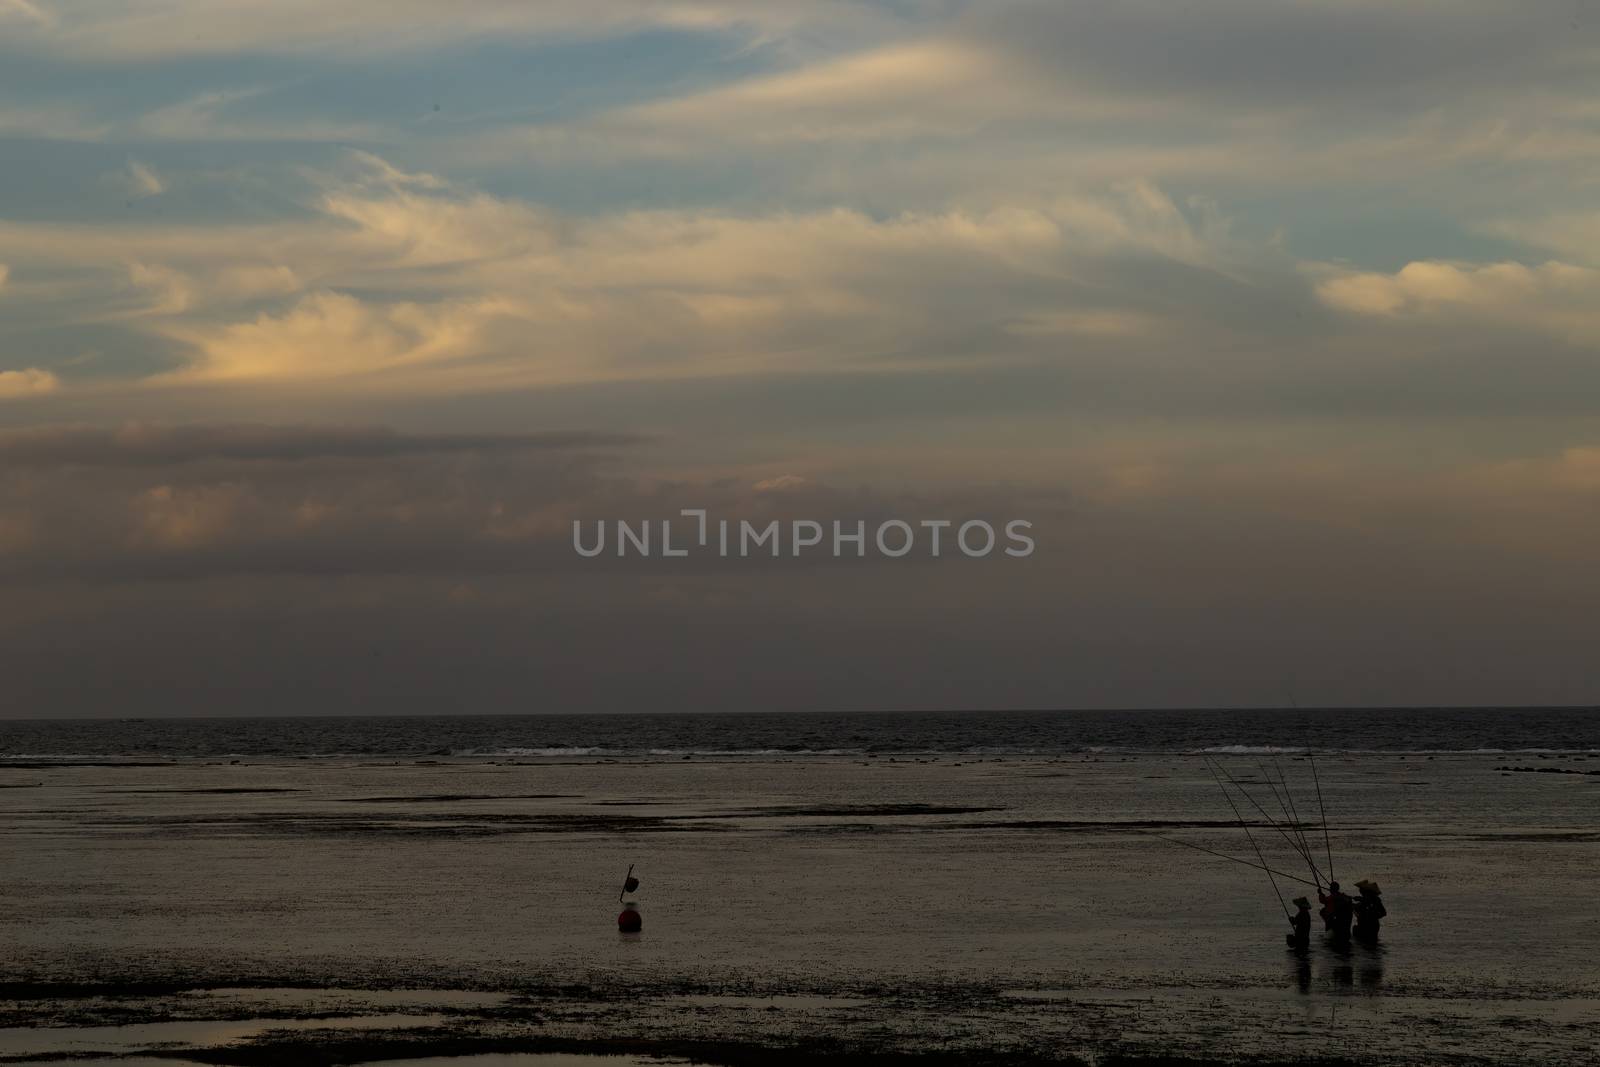 Bali, Indonesia - CIRCA 2018: Group of fisherman fishing for fish in ocean water during sun set with a beautiful colored cloudy sky.